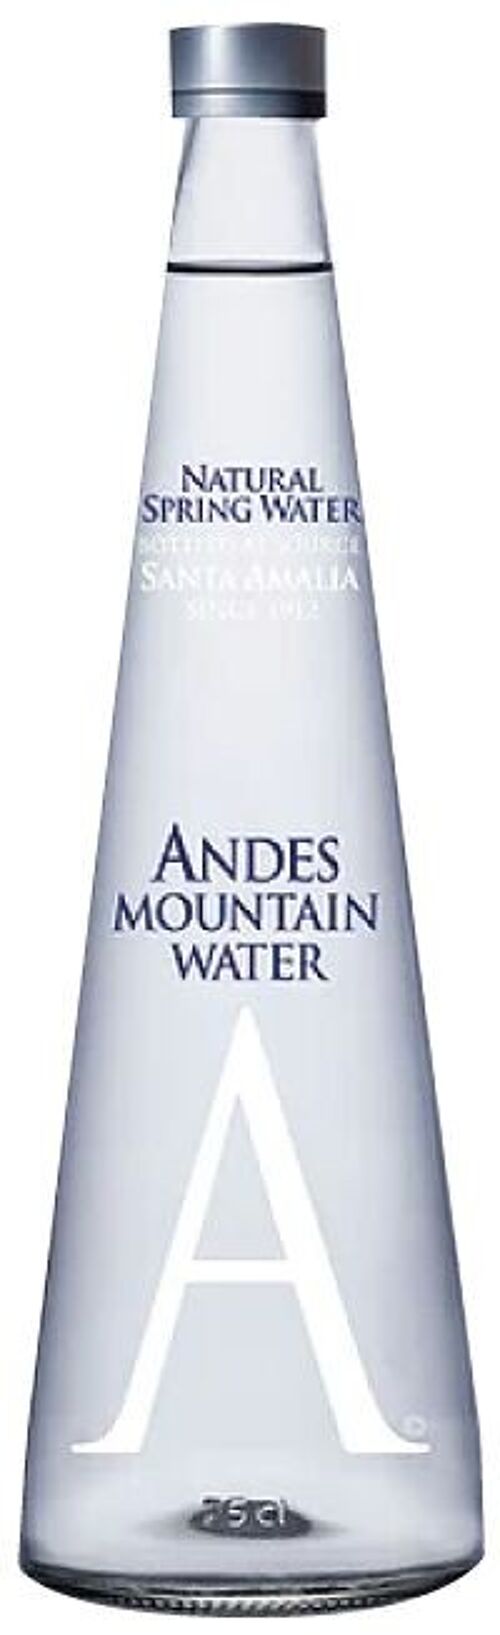 Andes Mountain water plate 75cl